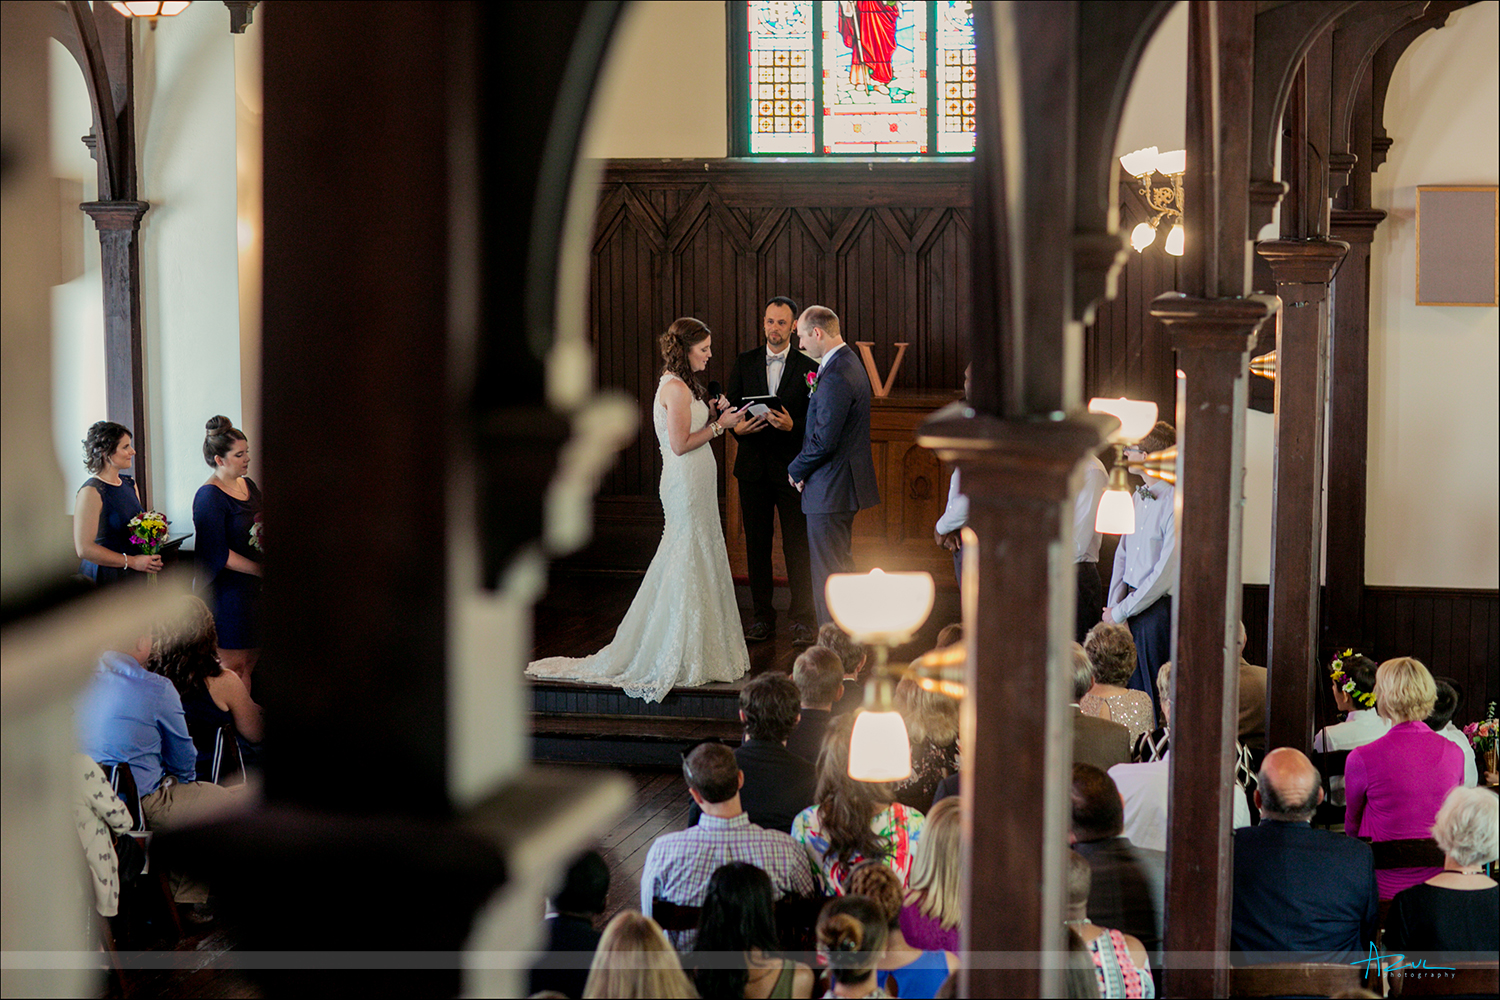 Beautiful vows spoken by the bride at her wedding in All Saints Chapel in Raleigh, NC